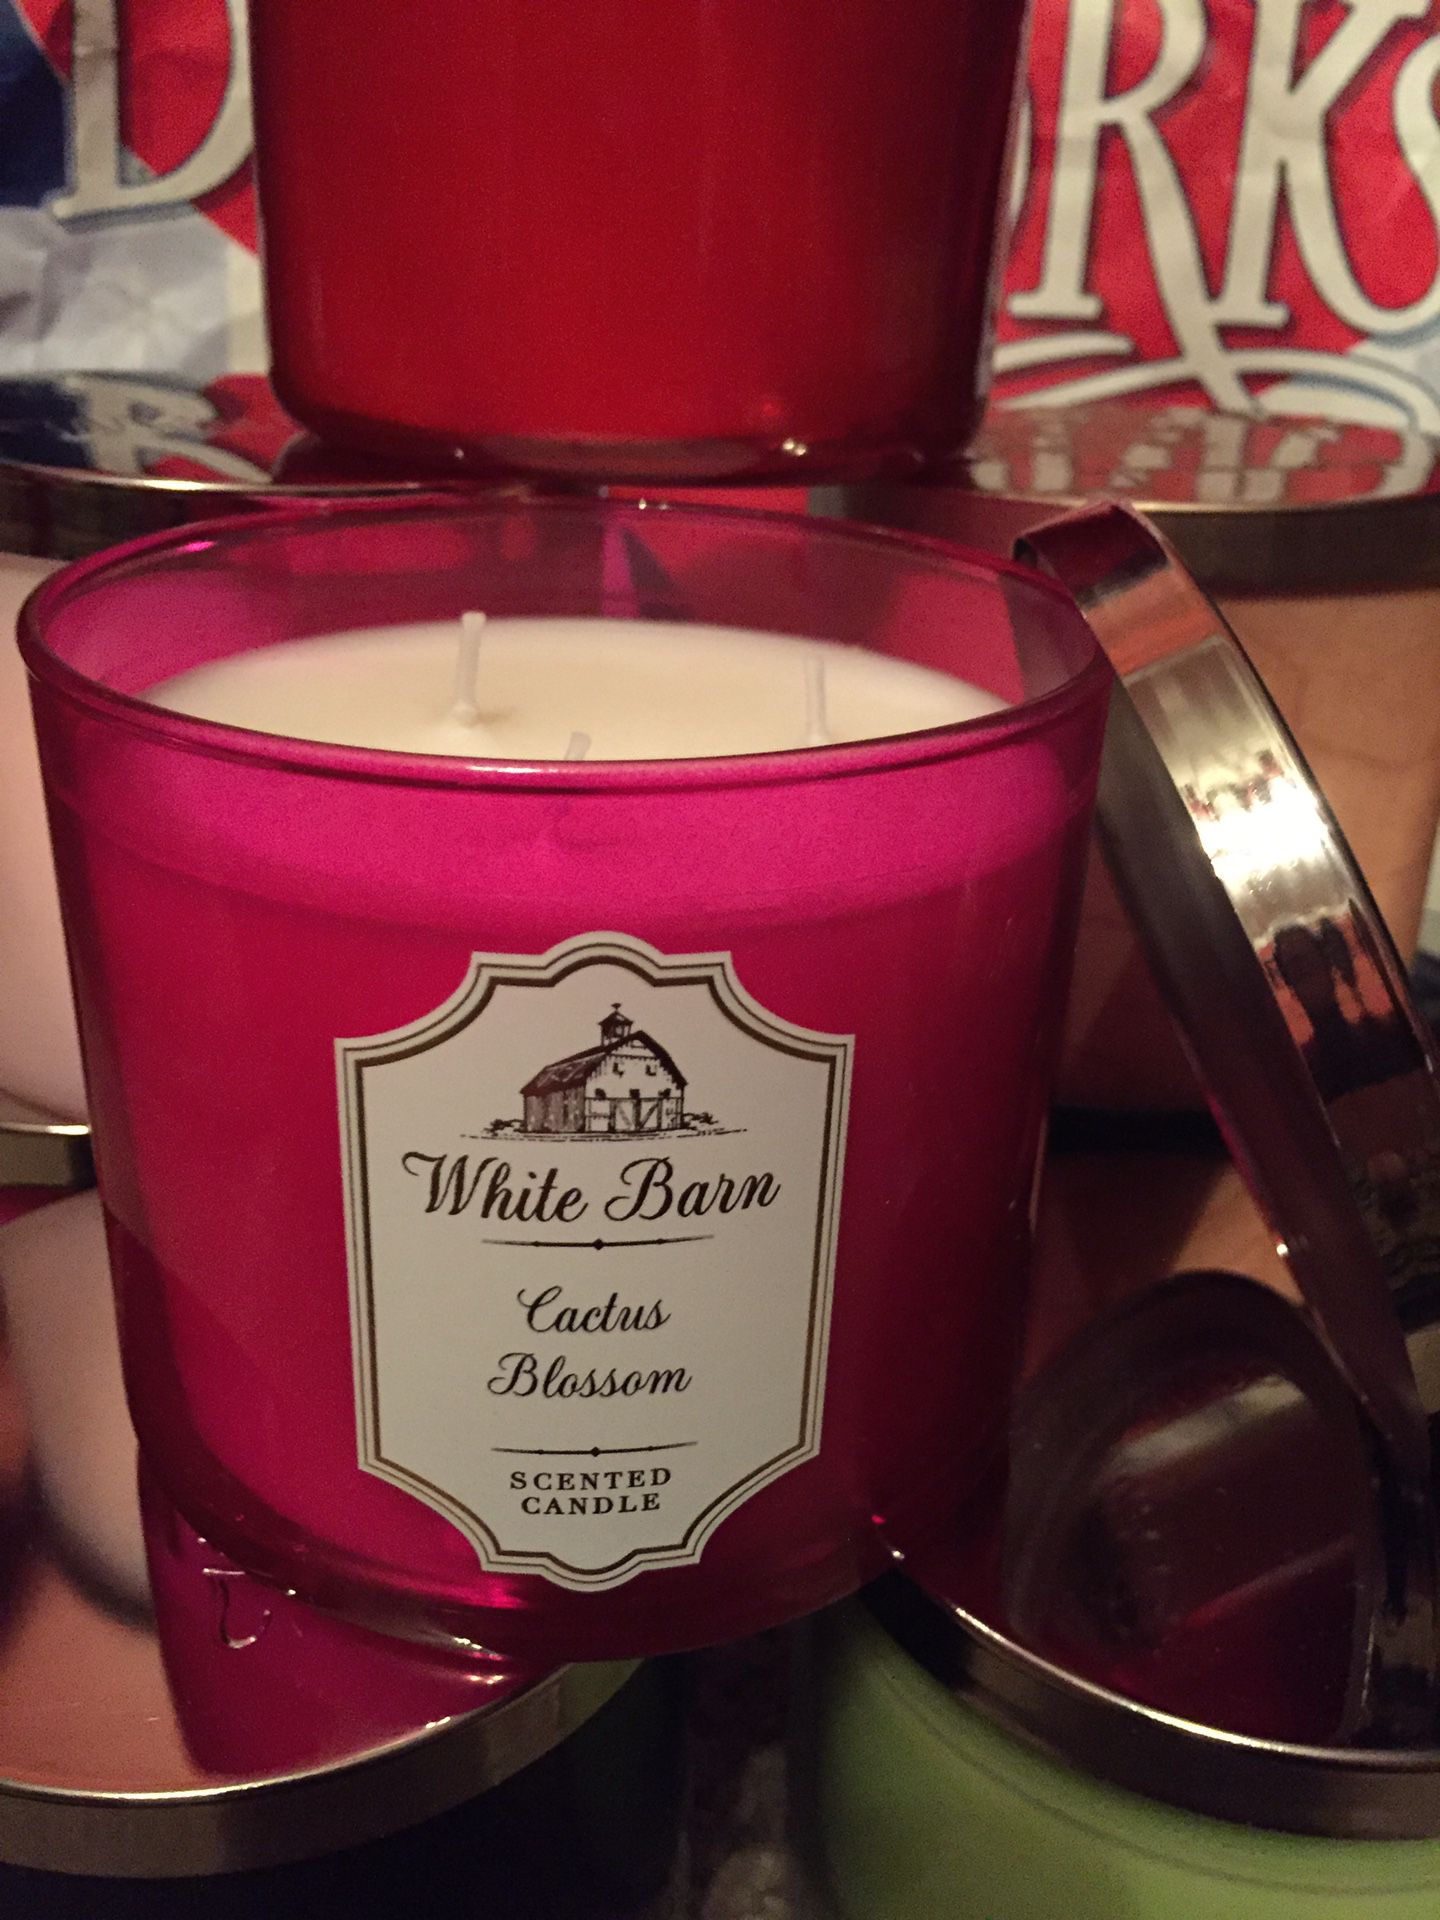 Bath and Body works 3 wick candle